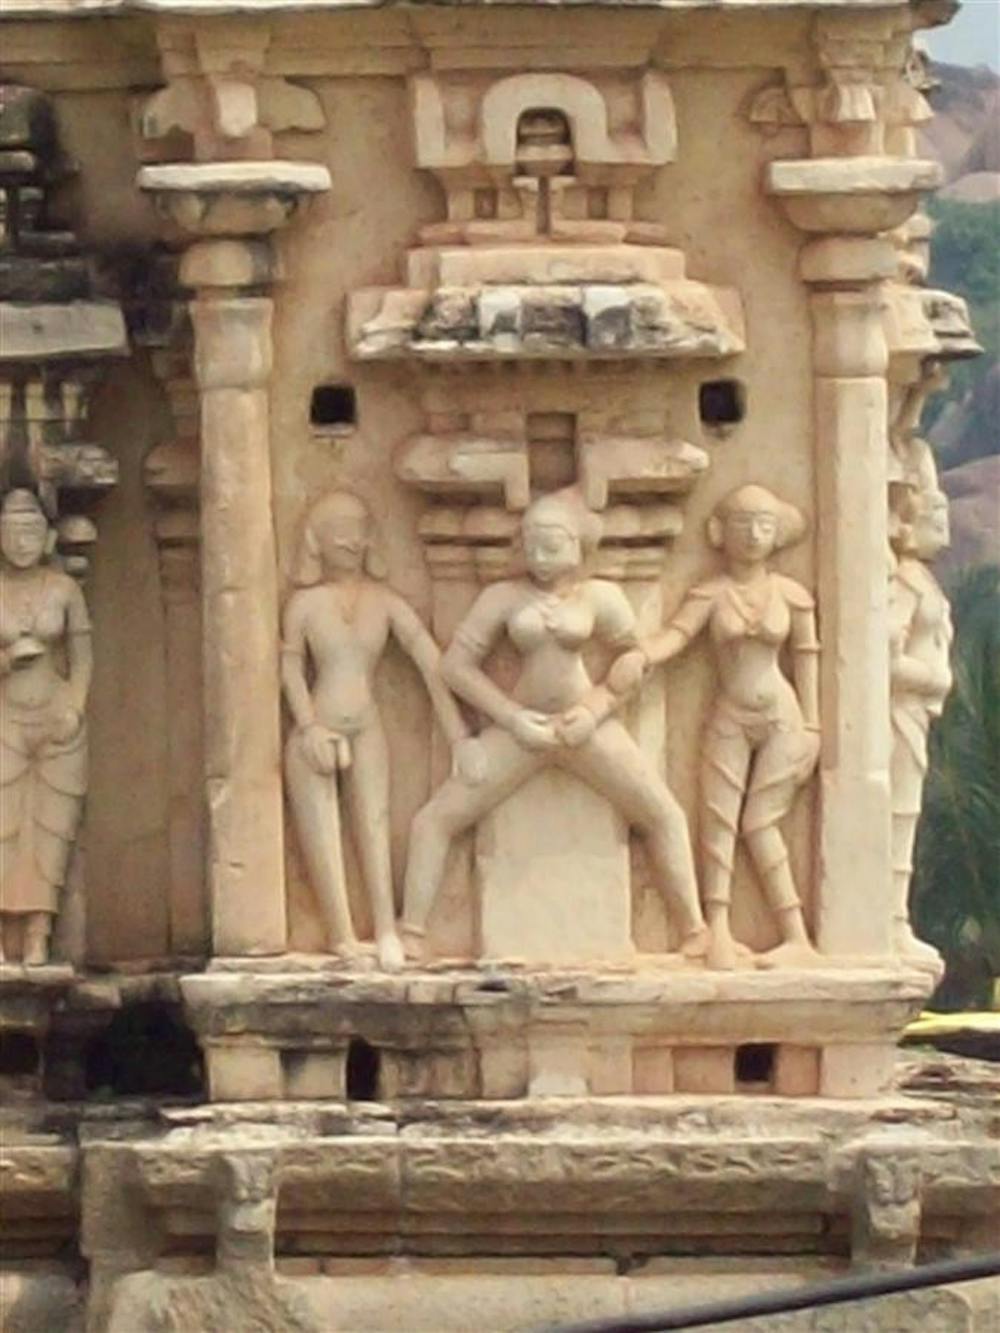 A temple decoration in Hampi, a village within an area of ruins in south-central India, depicts a woman exposing herself. The carving was either for decoration or to demonstrate part of the "Kama Sutra," but accounts vary and exact records are lost.